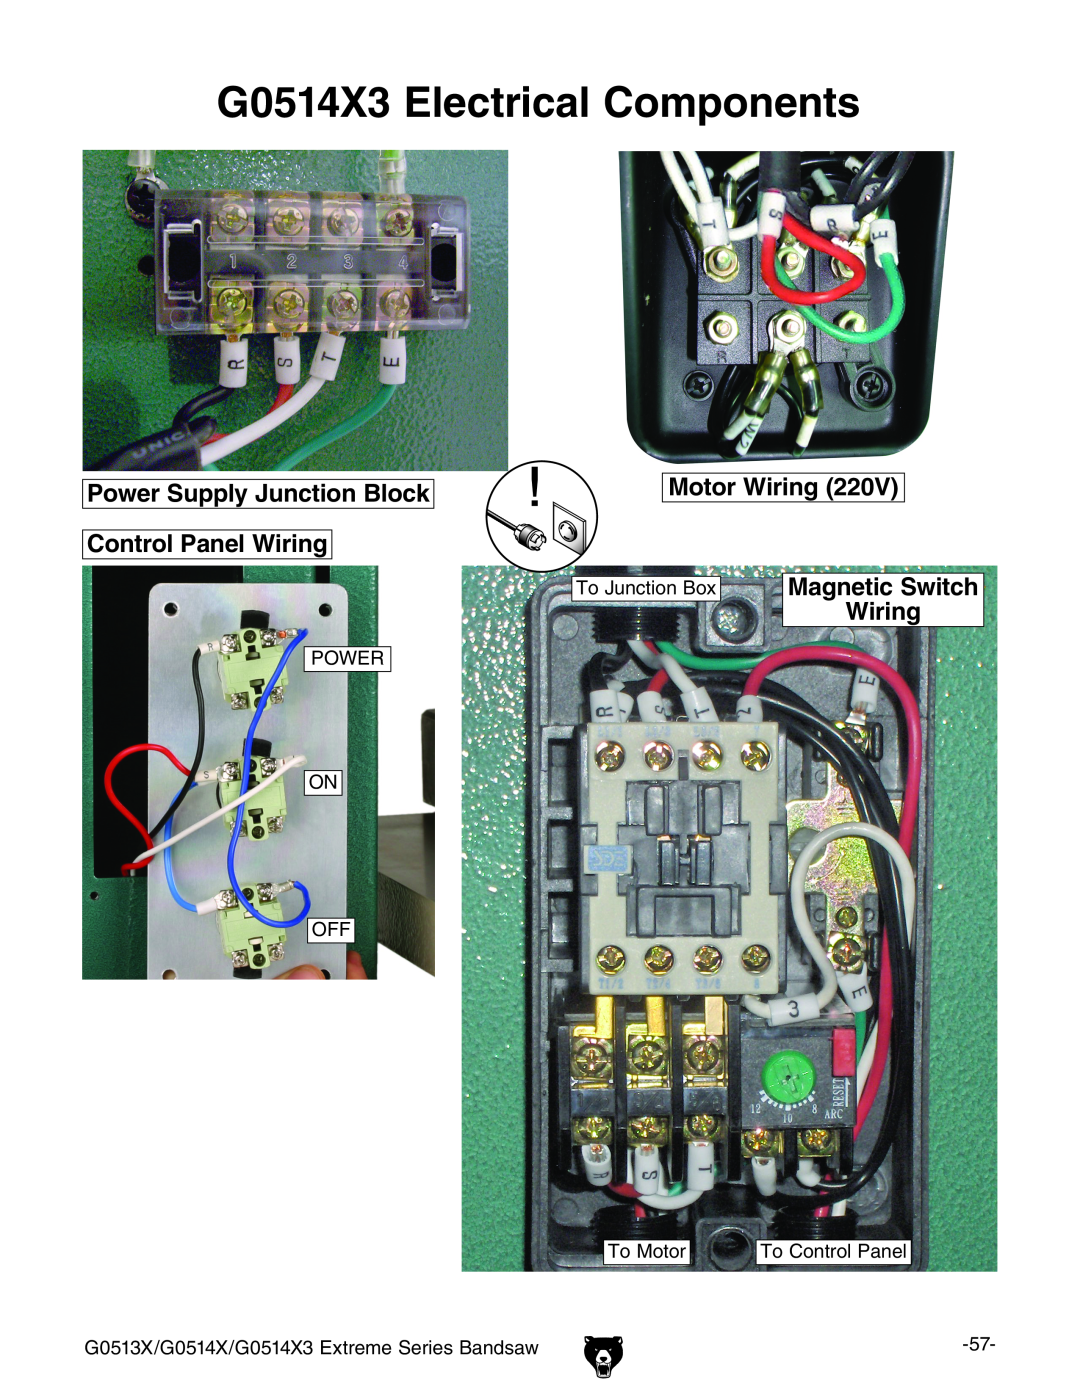 Grizzly G0514X3 Electrical Components, Power Supply Junction Block Control Panel Wiring, Motor Wiring, Magnetic Switch 